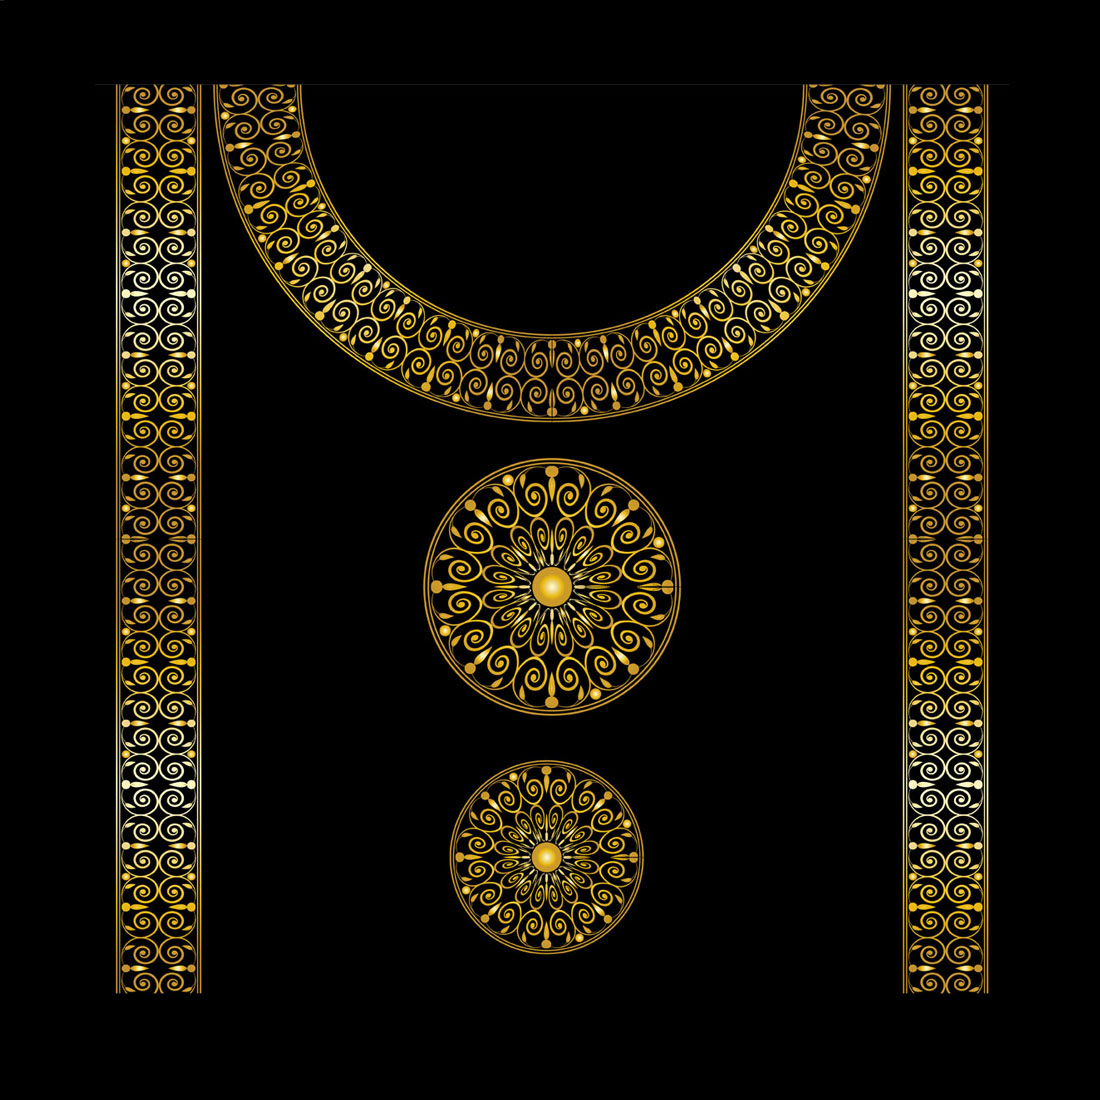 Golden Woman Dress Ornament Frame Design Vector Around Neck and Chest cover image.